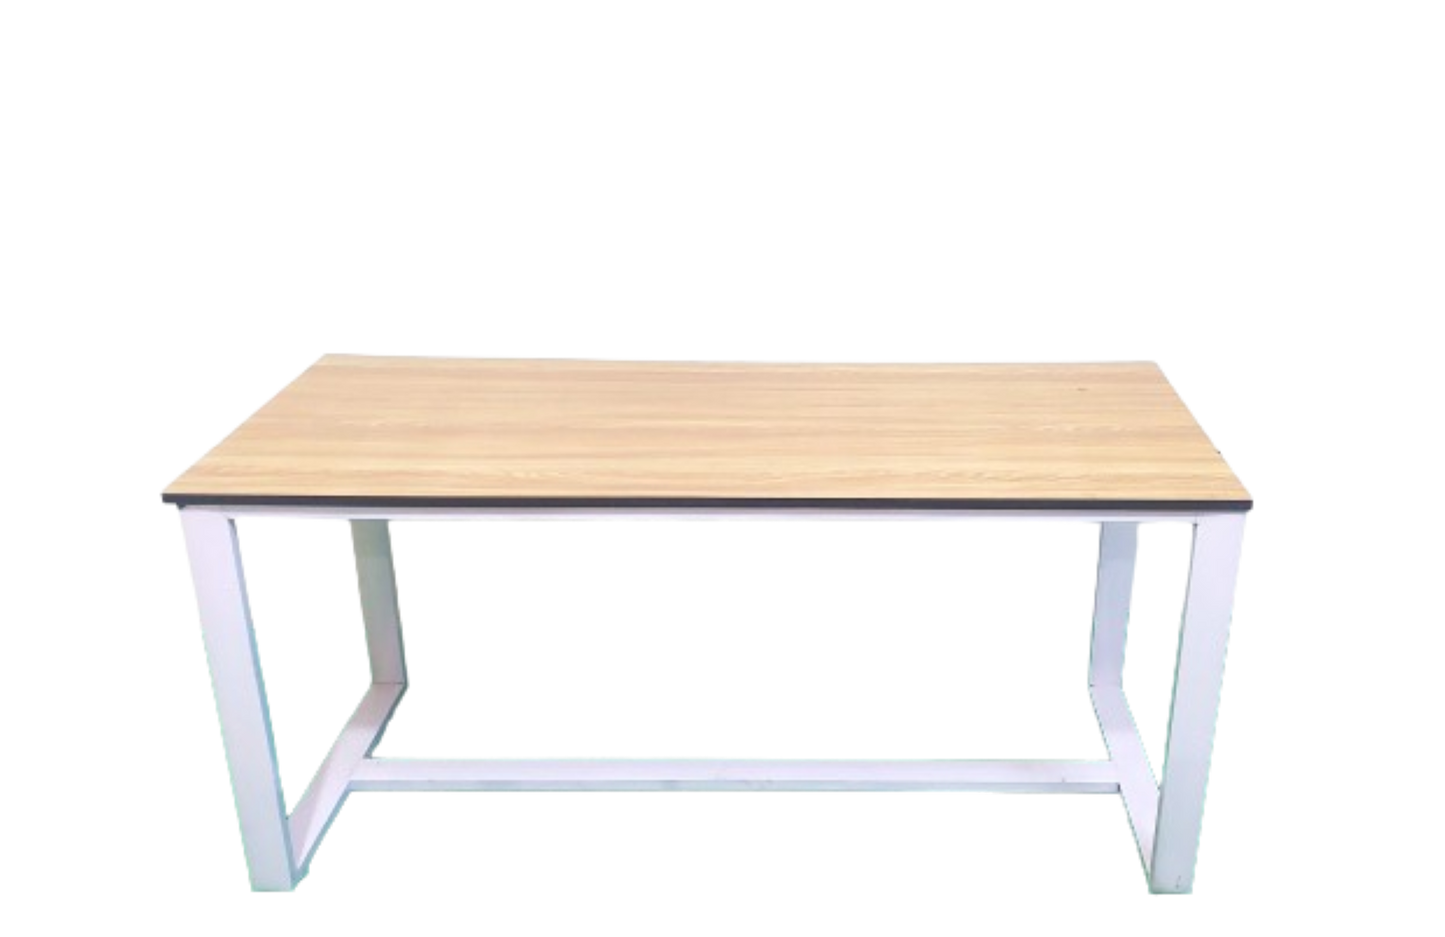 Bowzar Metal and Board Desk Table Computer Workstation 60X24 Inch